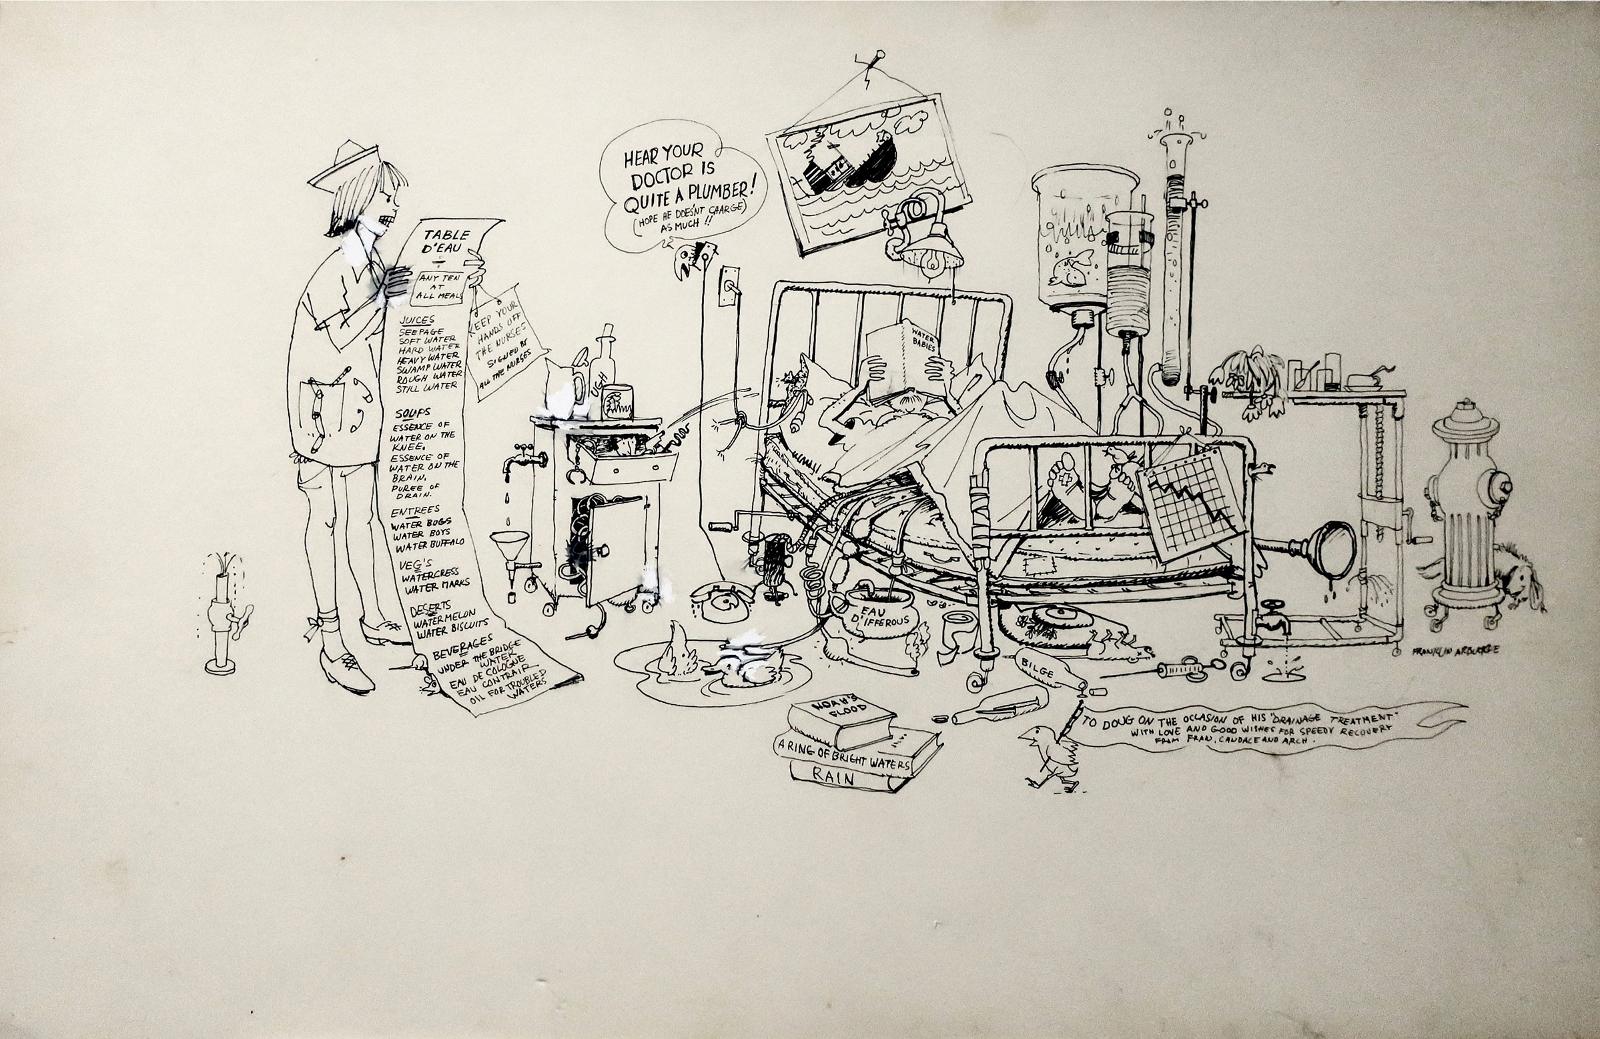 George Franklin Arbuckle (1909-2001) - Hear Your Doctor Is Quite A Plumber!